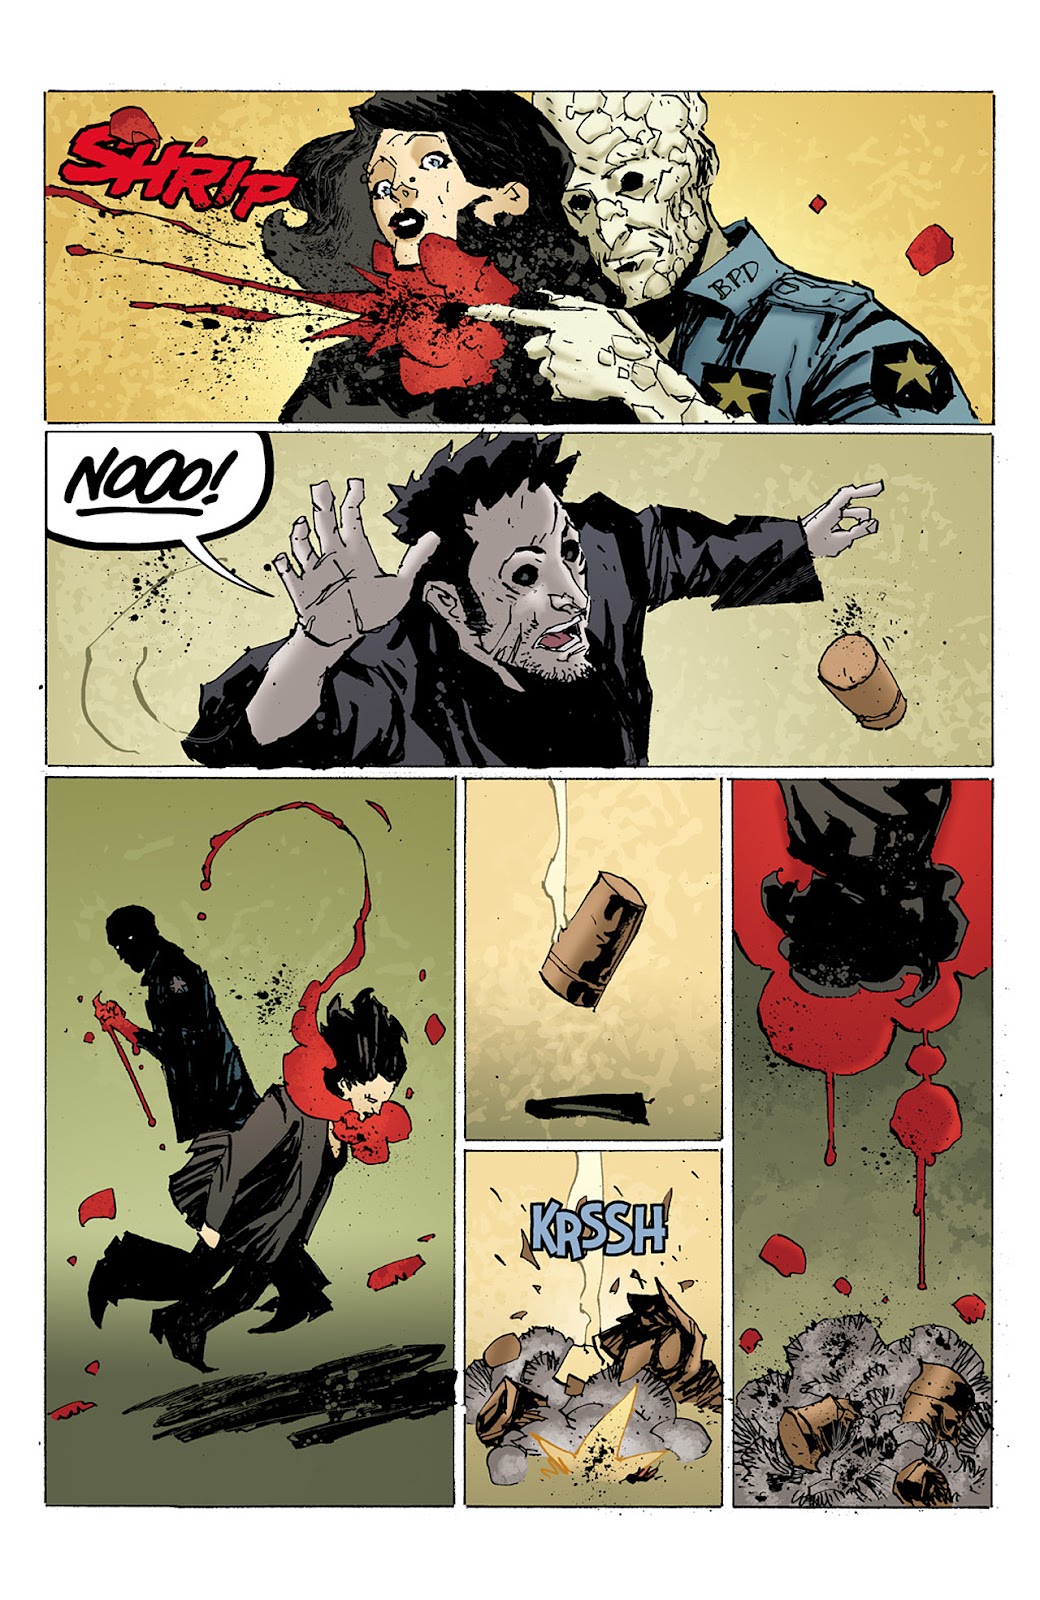 Criminal Macabre: Final Night - The 30 Days of Night Crossover issue 4 - Page 18